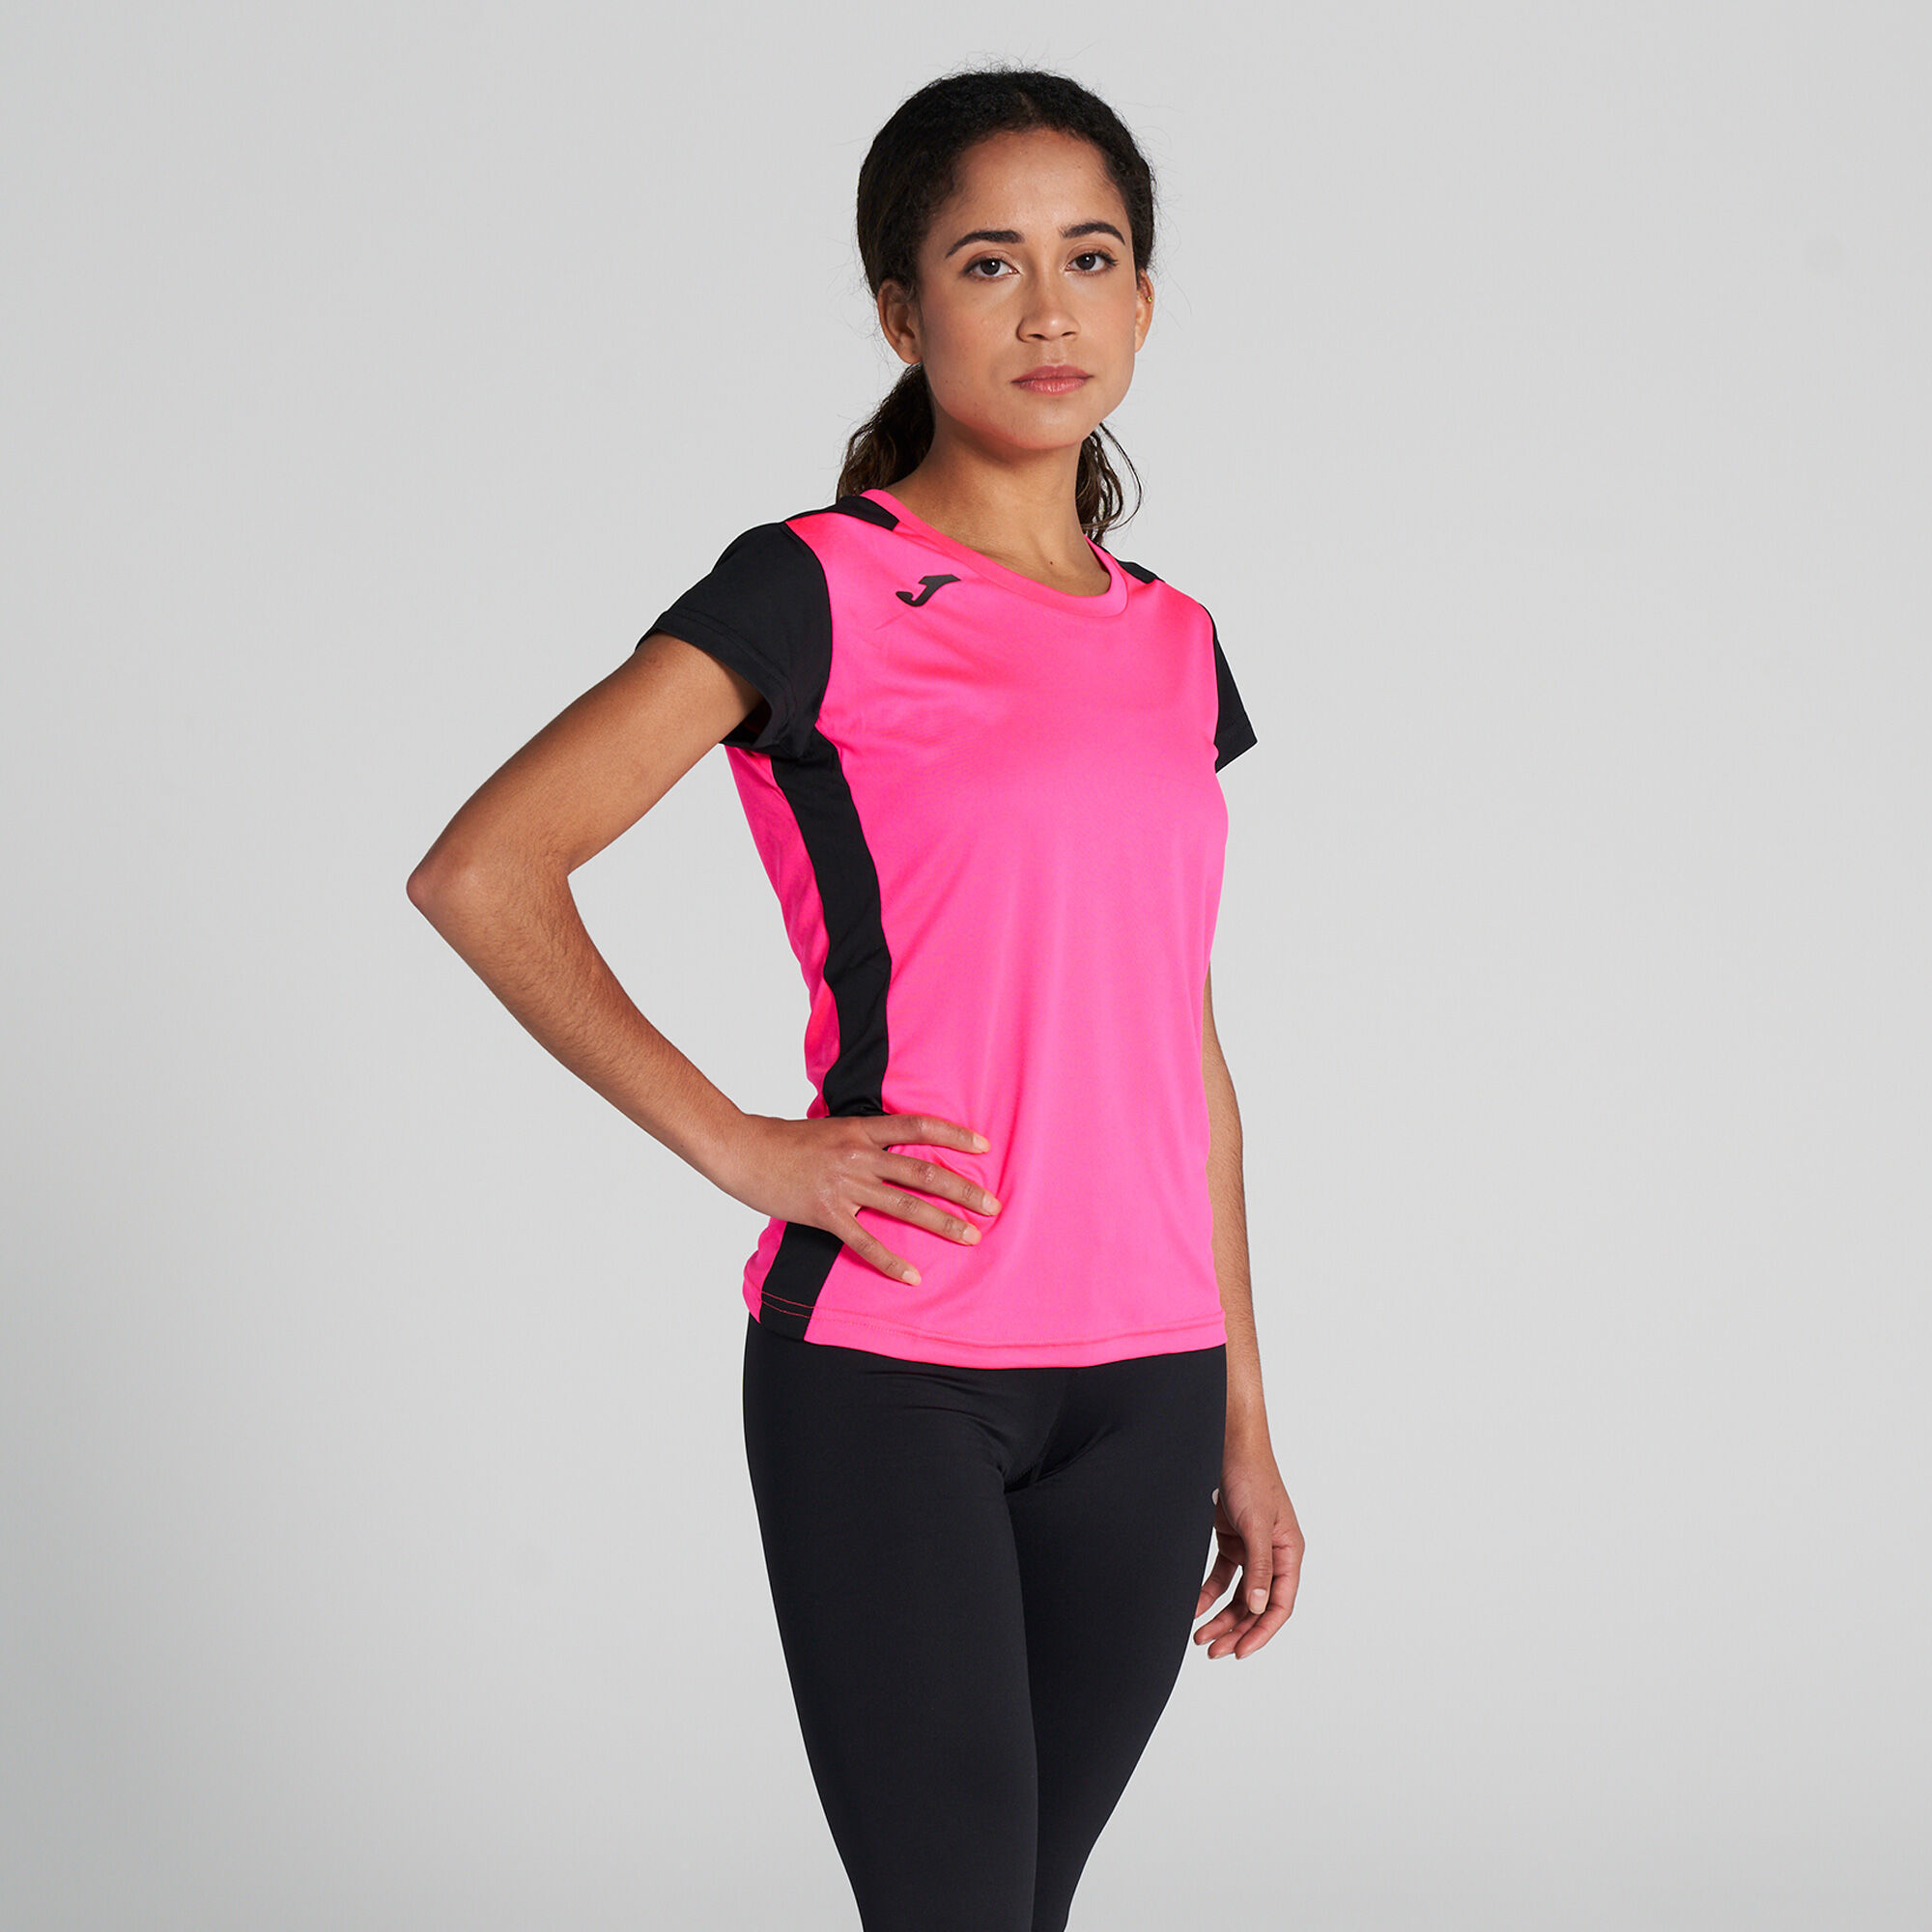 MAILLOT MANCHES COURTES FEMME RECORD II ROSE FLUO NOIR